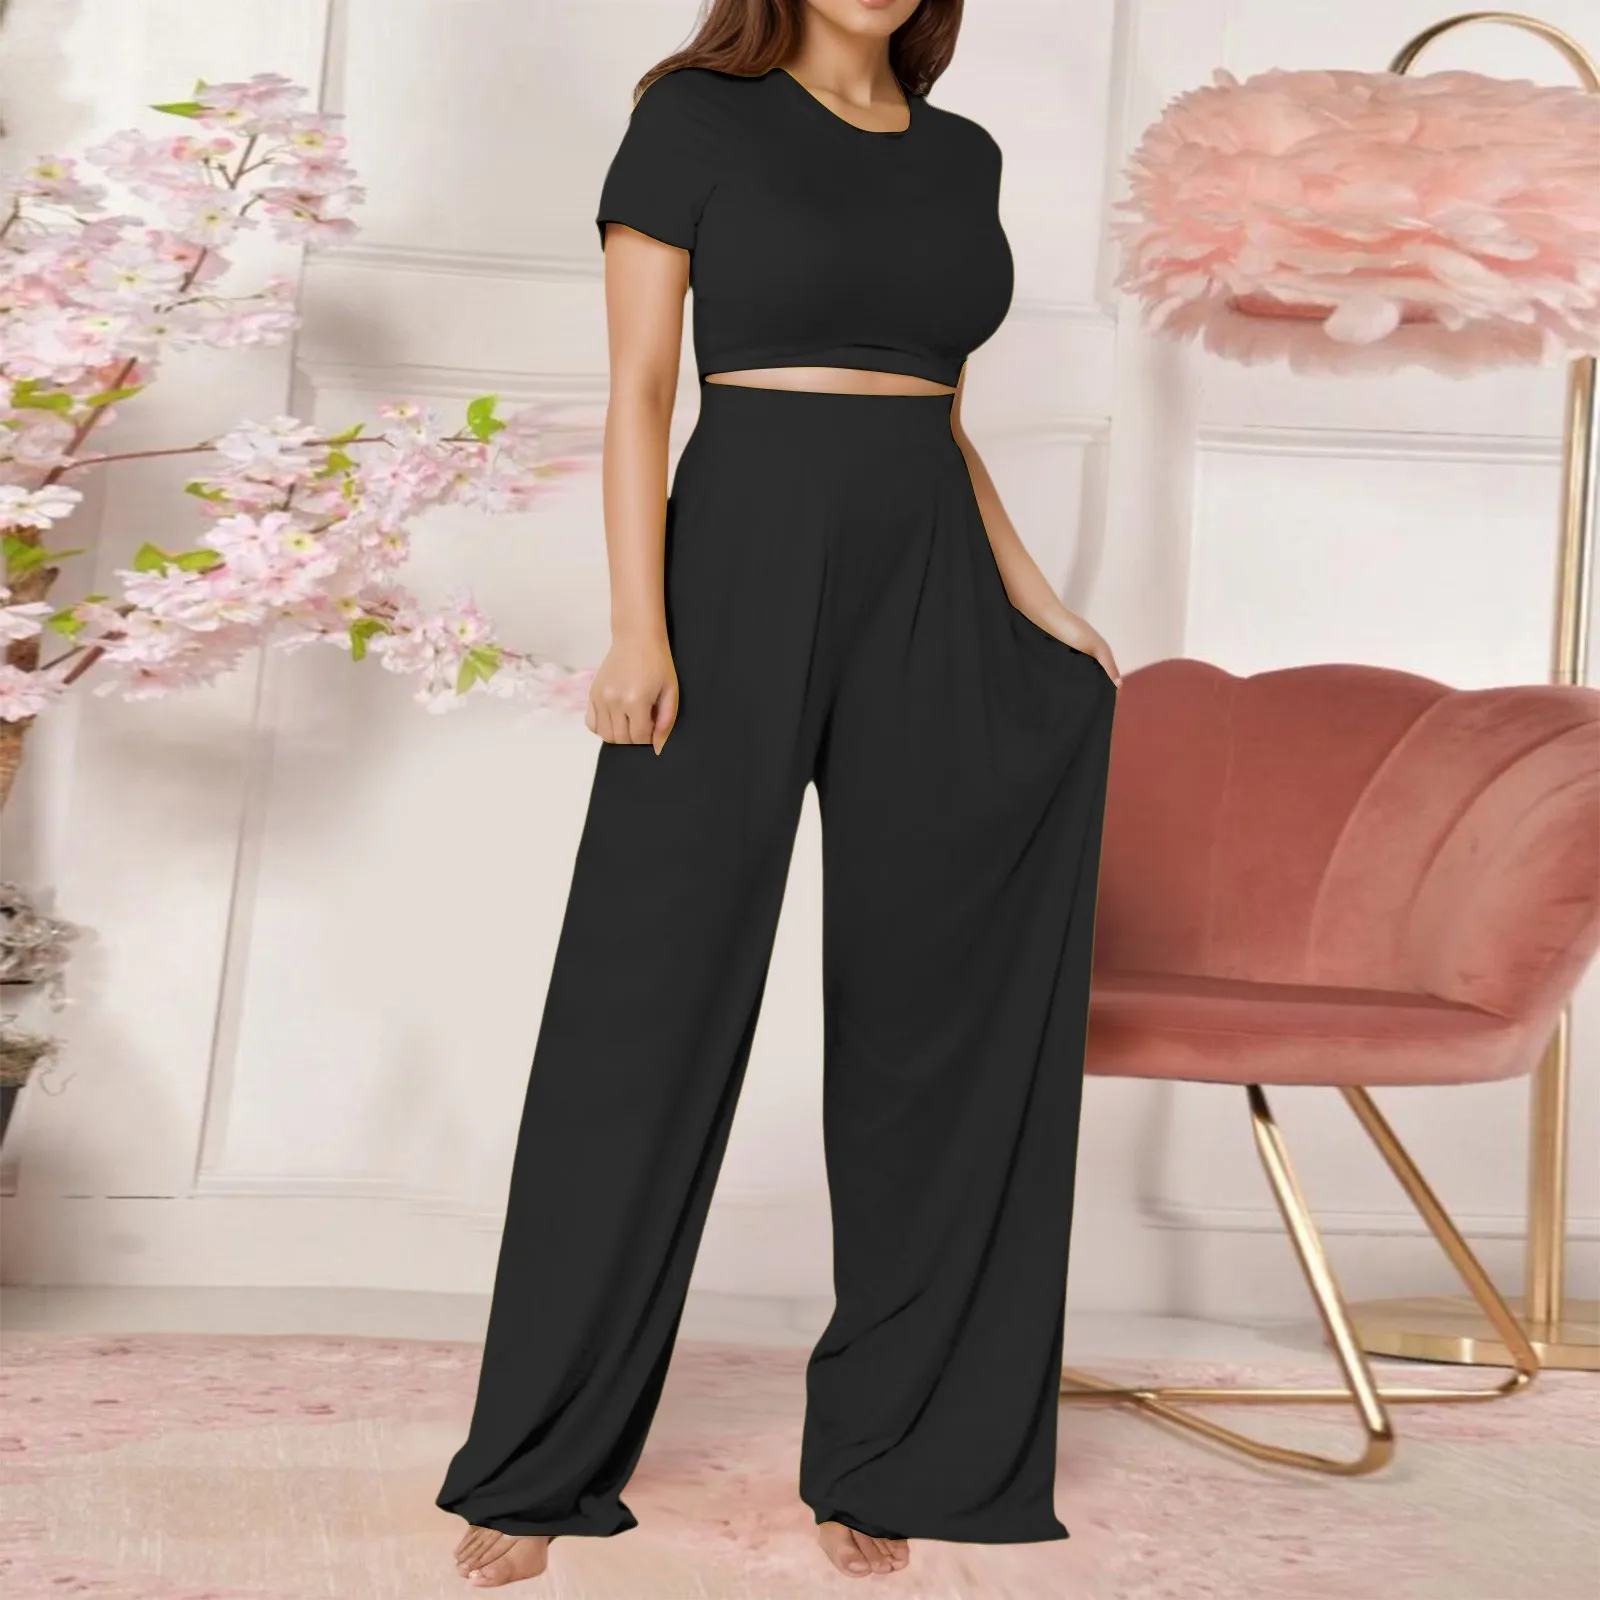 

Women Solid Color Suits Smooth fabric Sets Fashion Leisure Wide Leg Pants Trousers Short Sleeved Cropped Tops Sweat Suit